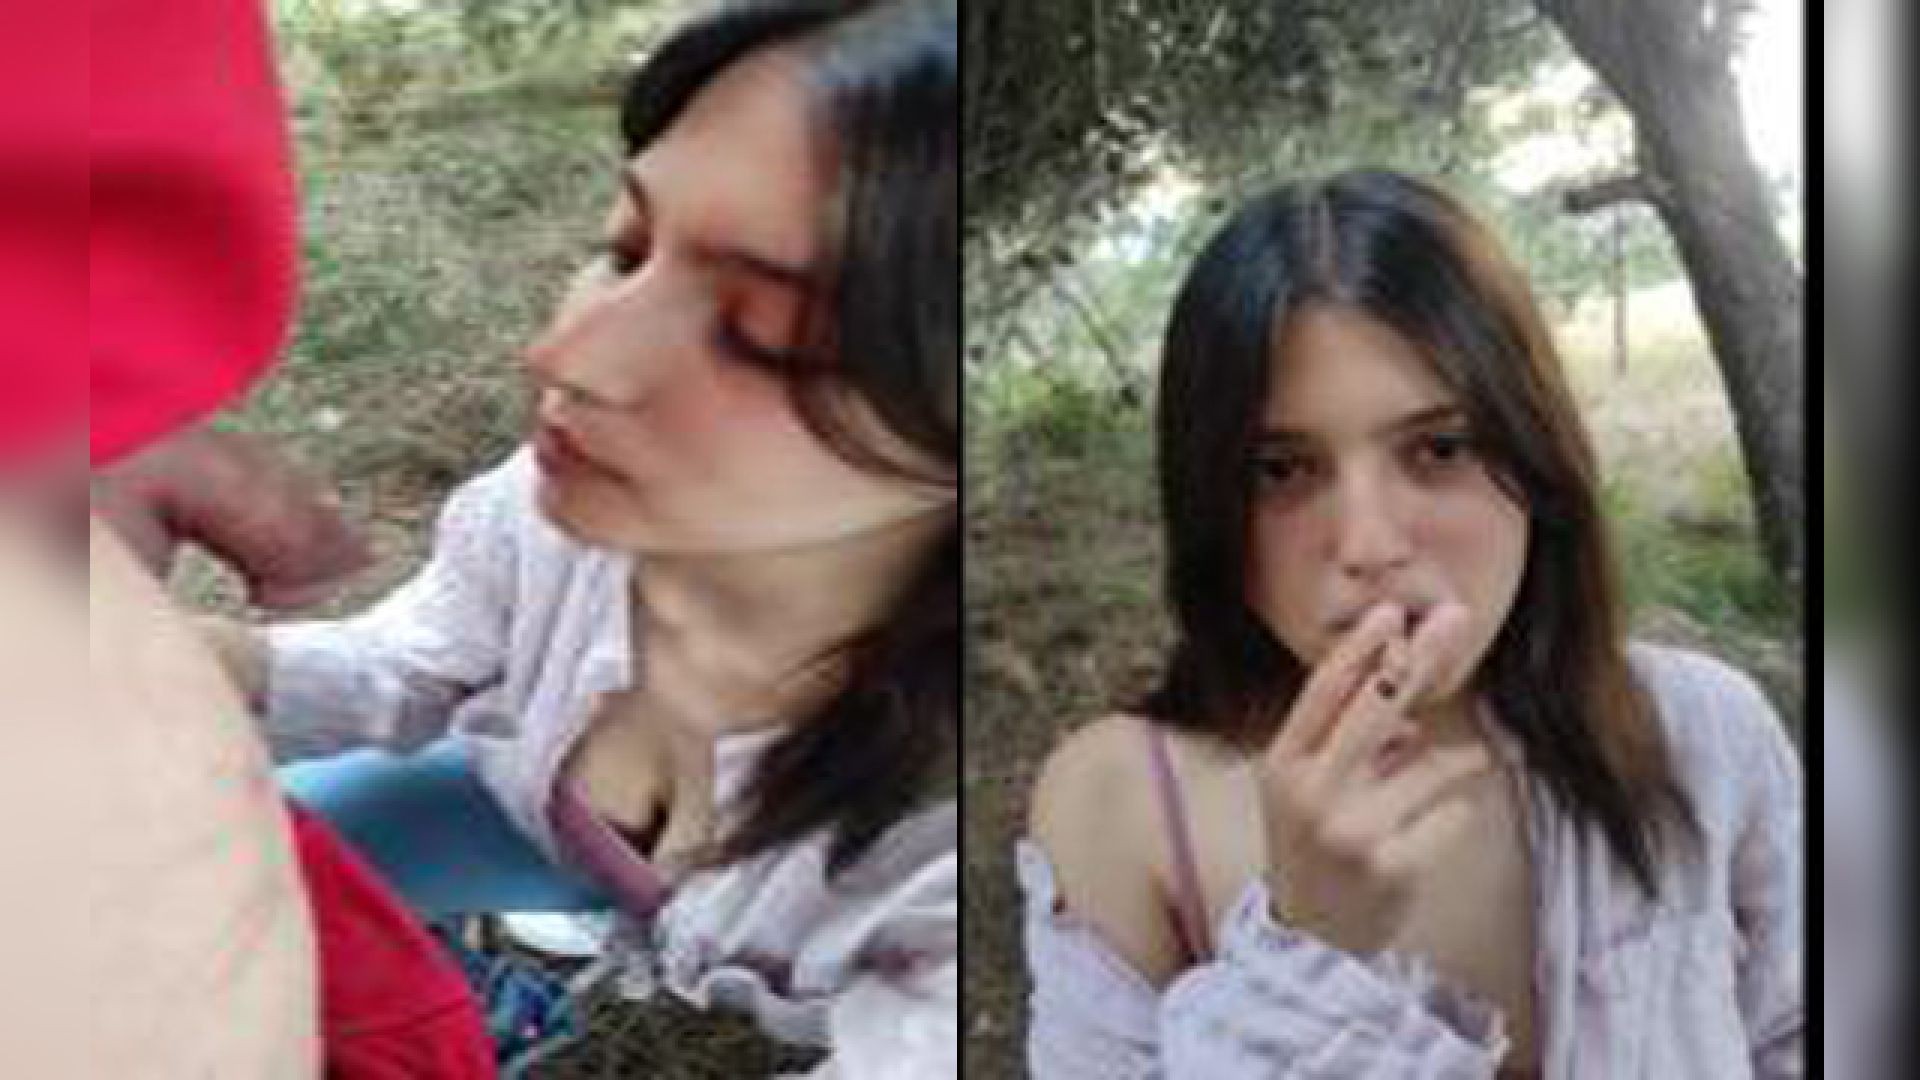 Today Exclusive- Gf smoking and fucking outdoor